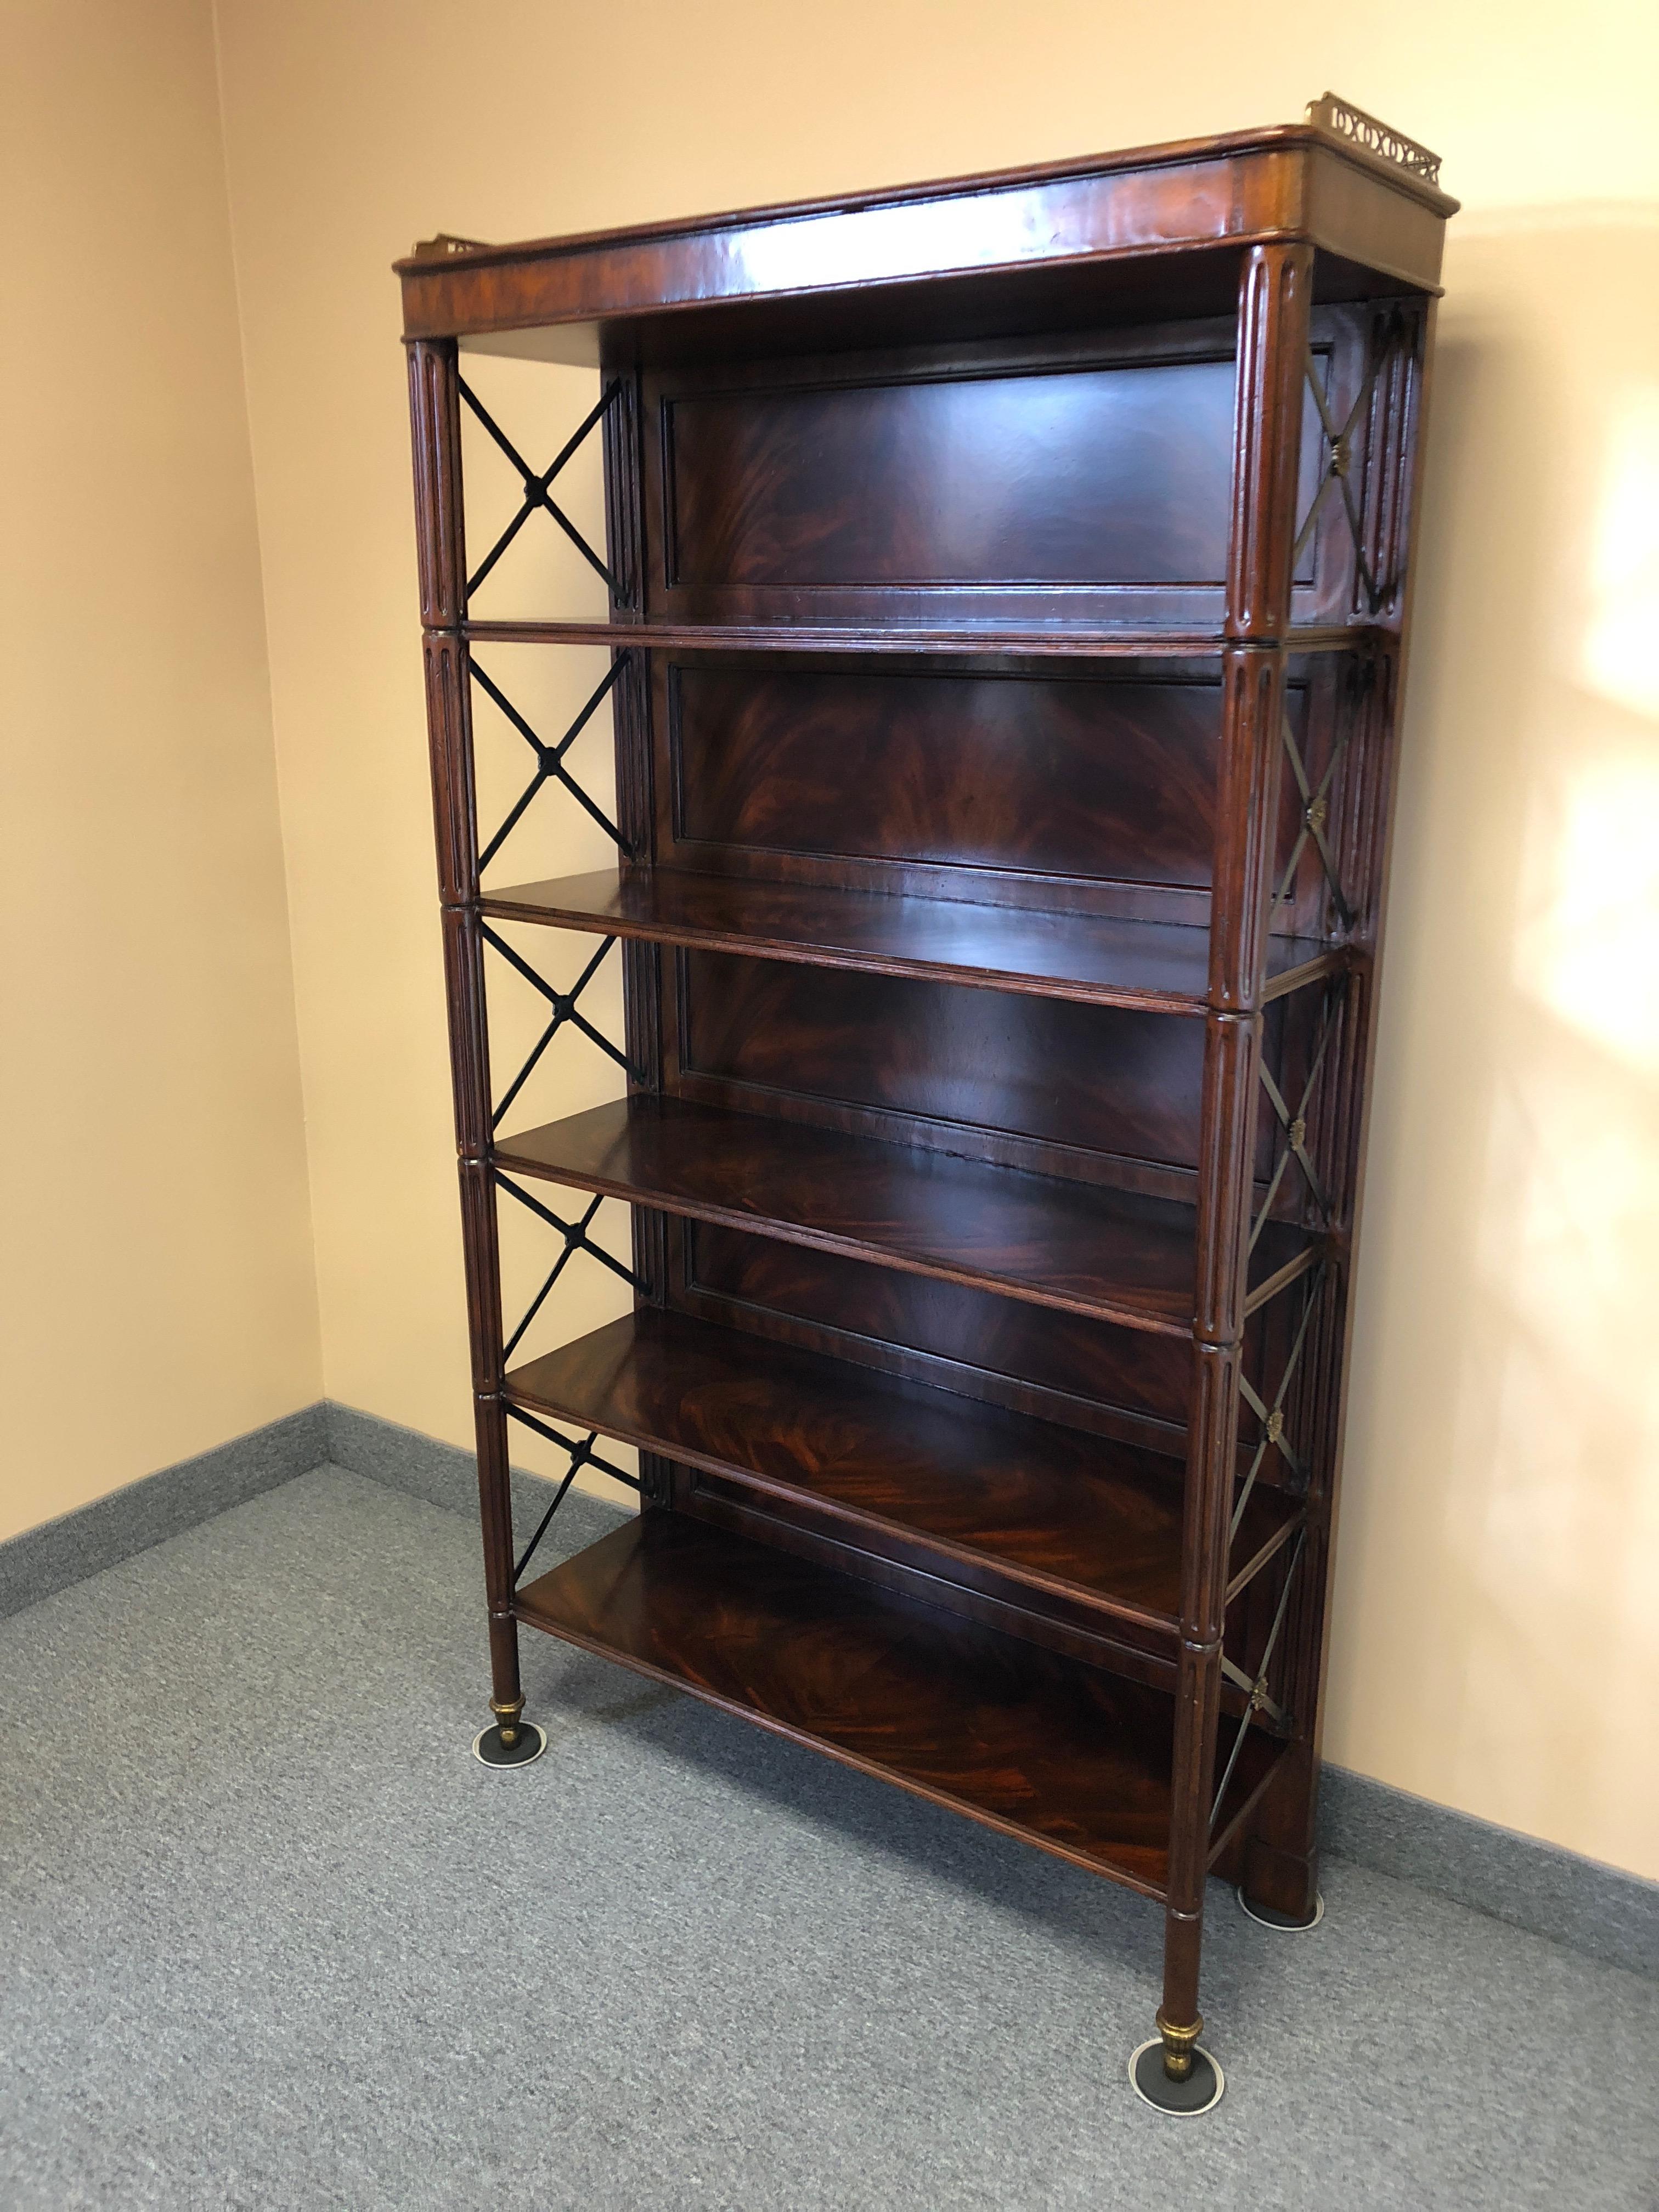 Handsome campaign style versatile flame mahogany bookshelf or étagère having 5 shelves and stylish iron X's on the sides with decorative brass medallions. Lovely brass gallery on the top edge of the étagère.
Space between shelves is 10.25 H shelves